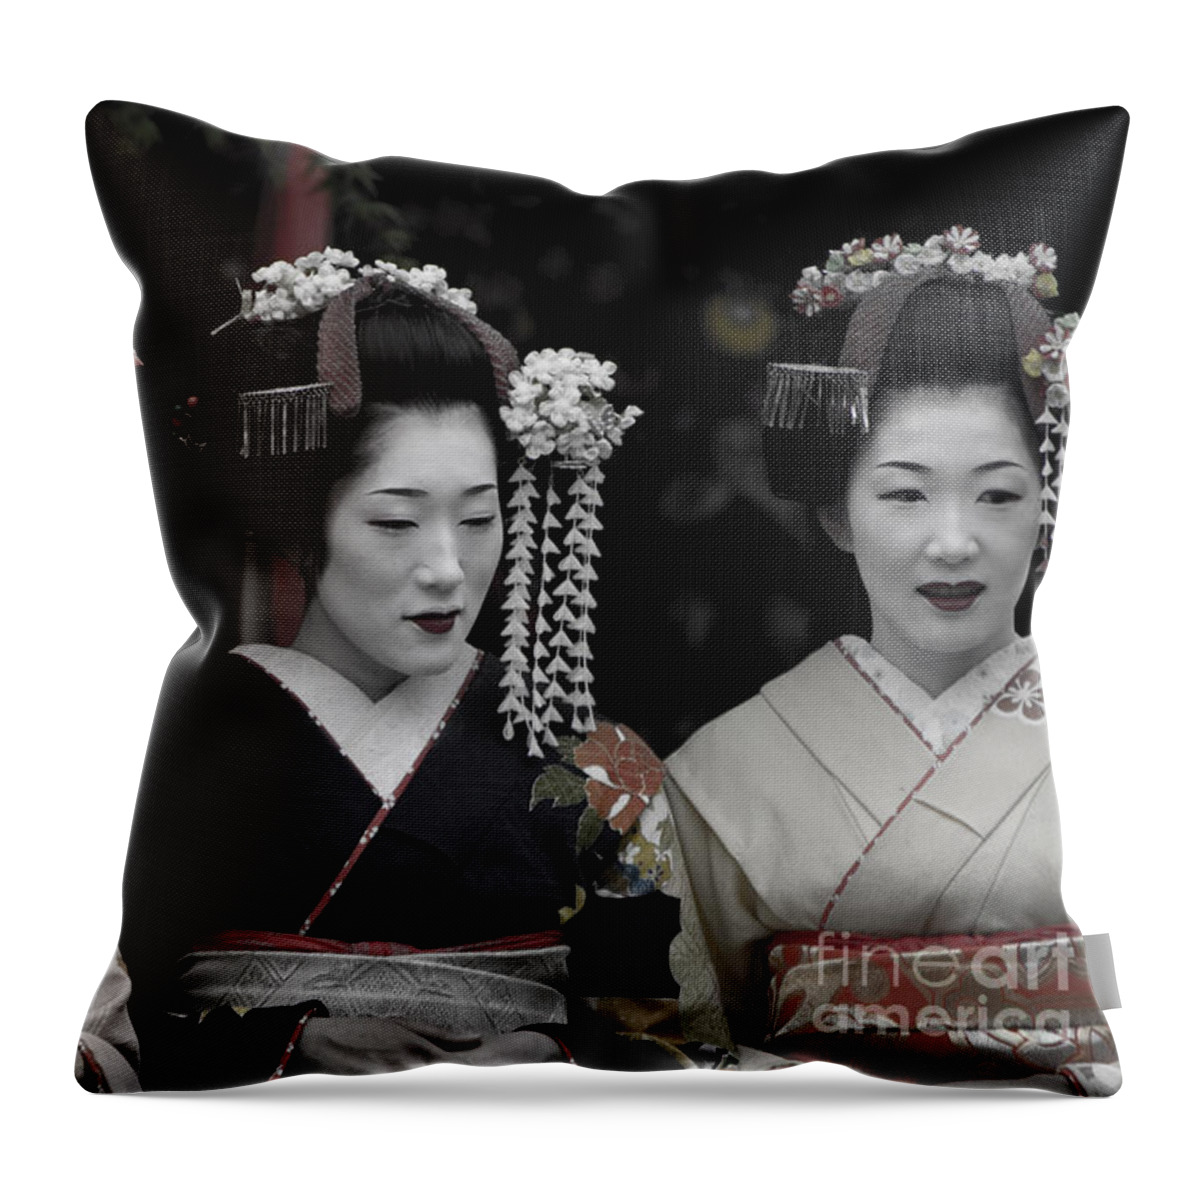 Japan Throw Pillow featuring the photograph Kyoto Geishas by Waterdancer 